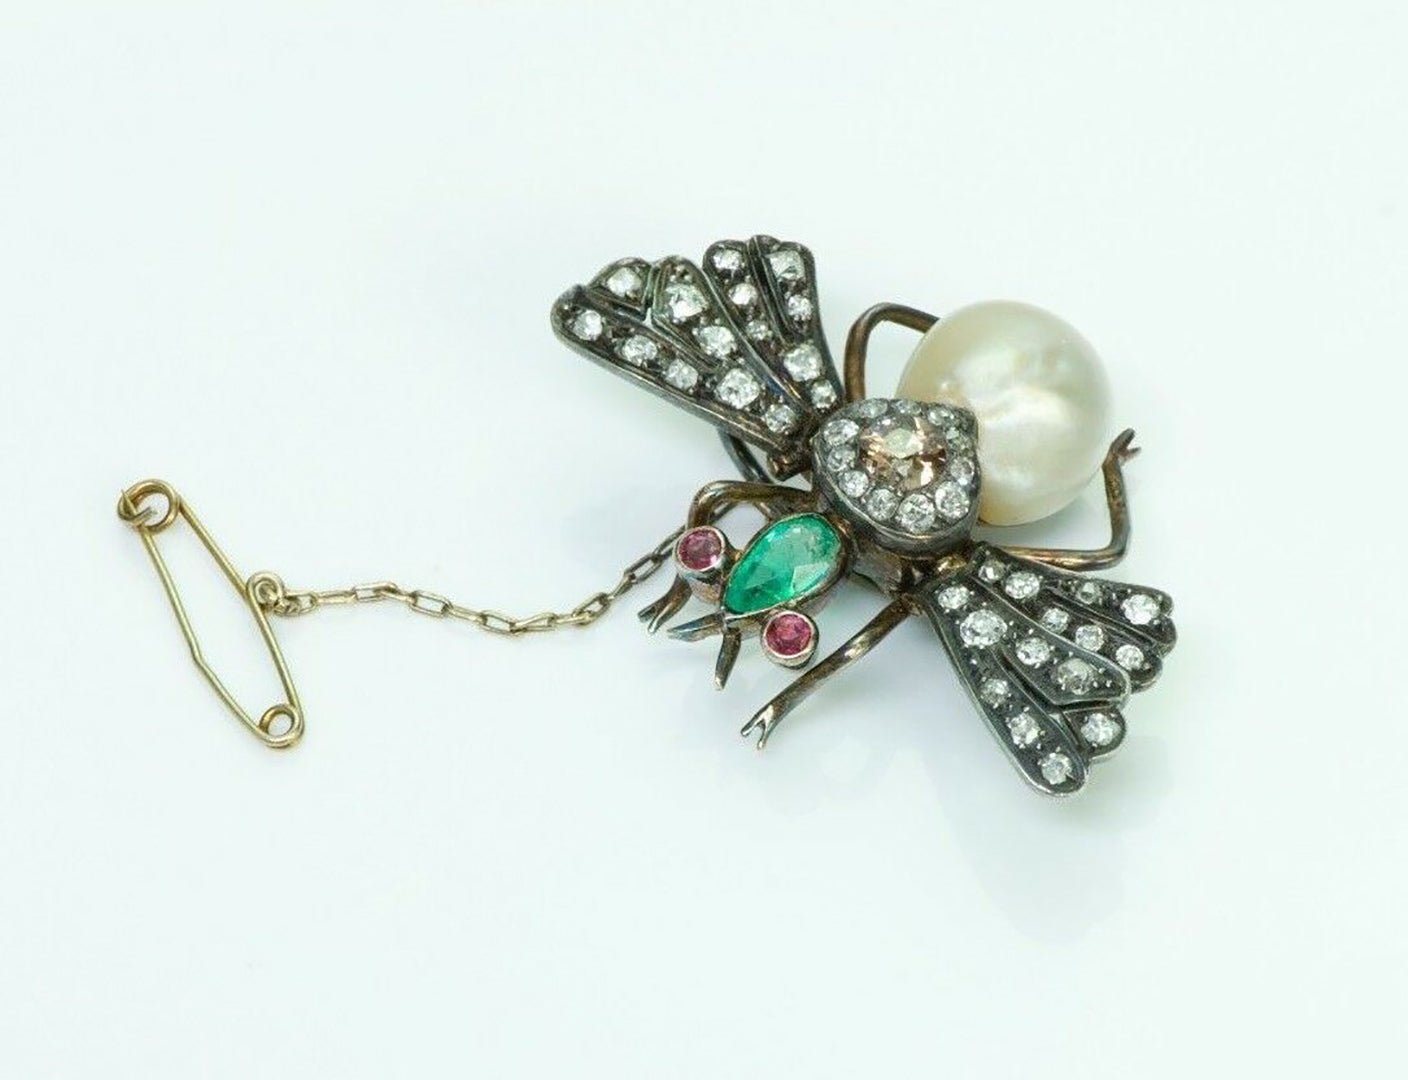 Antique French Diamond Emerald Pearl Ruby Silver Fly Pin Brooch - DSF Antique Jewelry